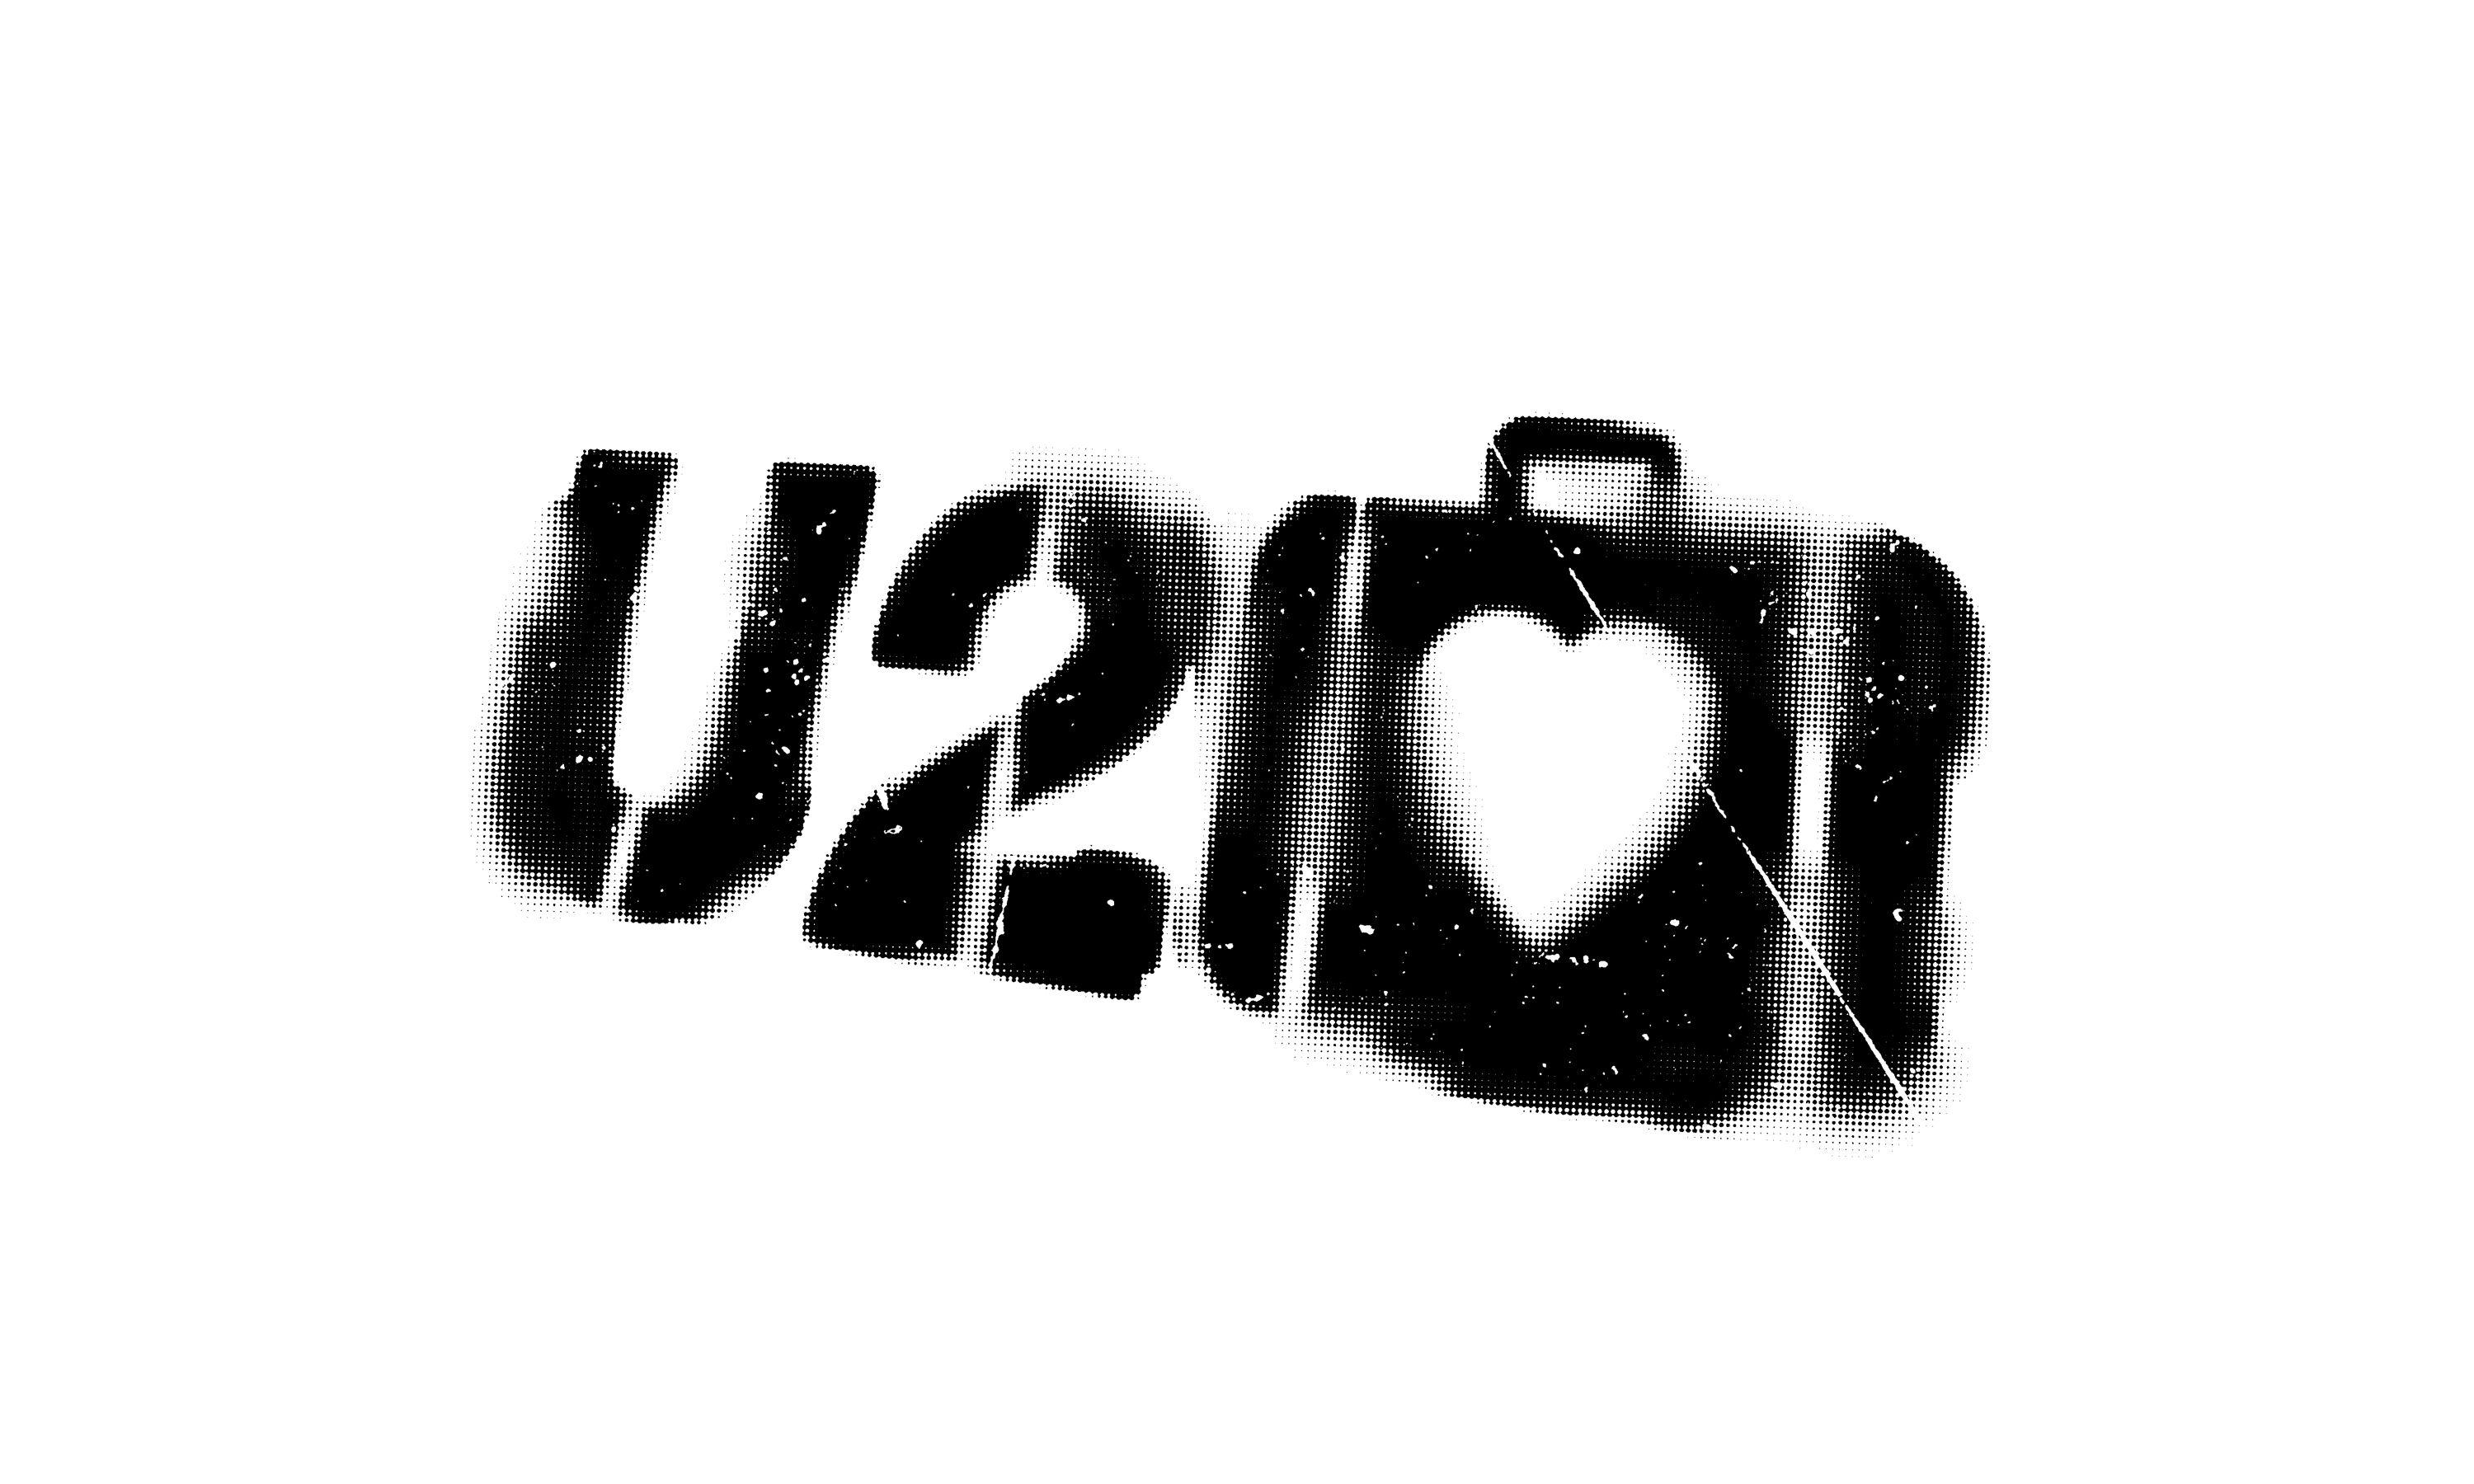 U2 Logo - U2 all that you can't leave behind Logo and Identity Design AMP ...